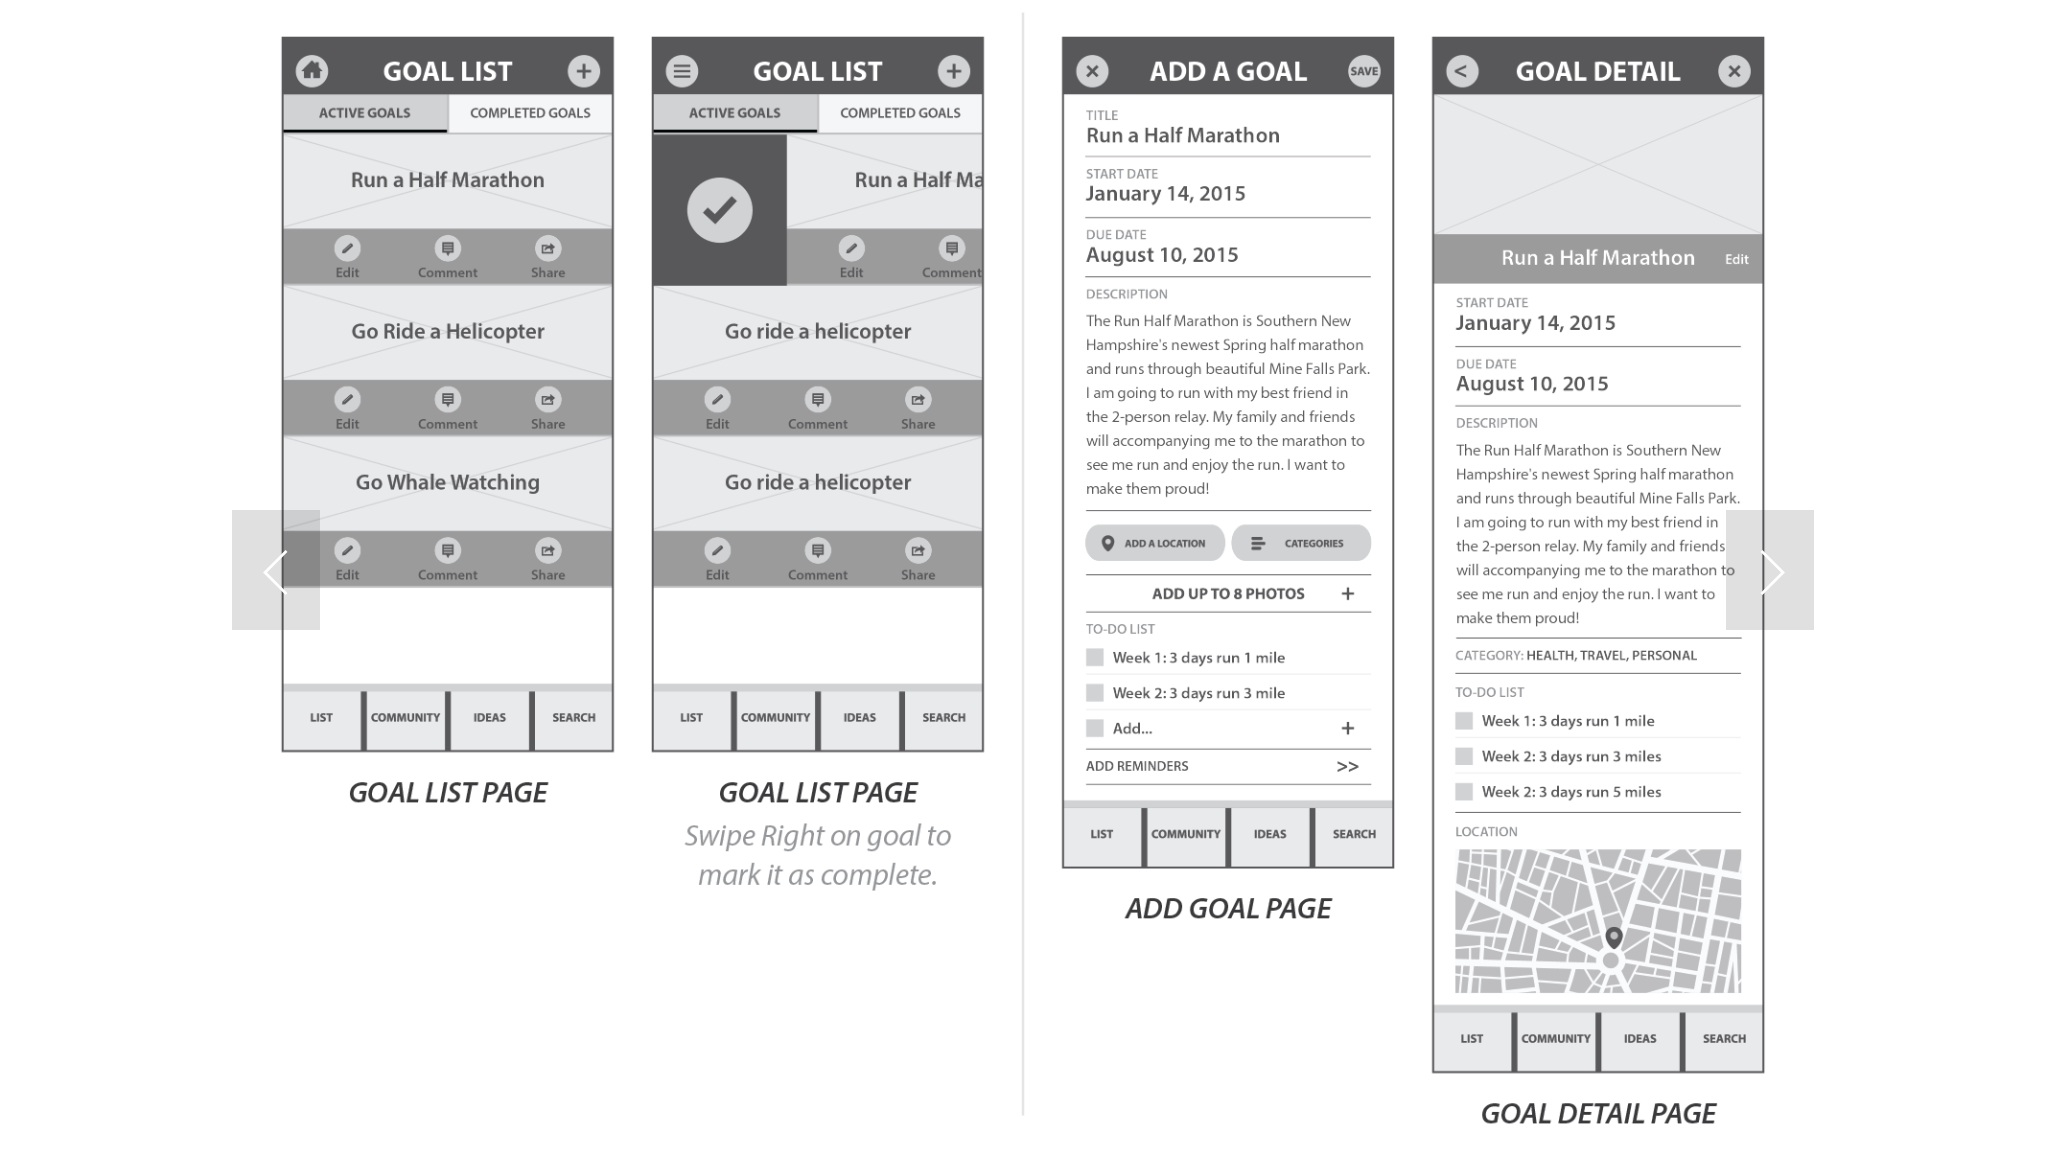 Showing the UX design process is the hallmark of the best UX design portfolios.